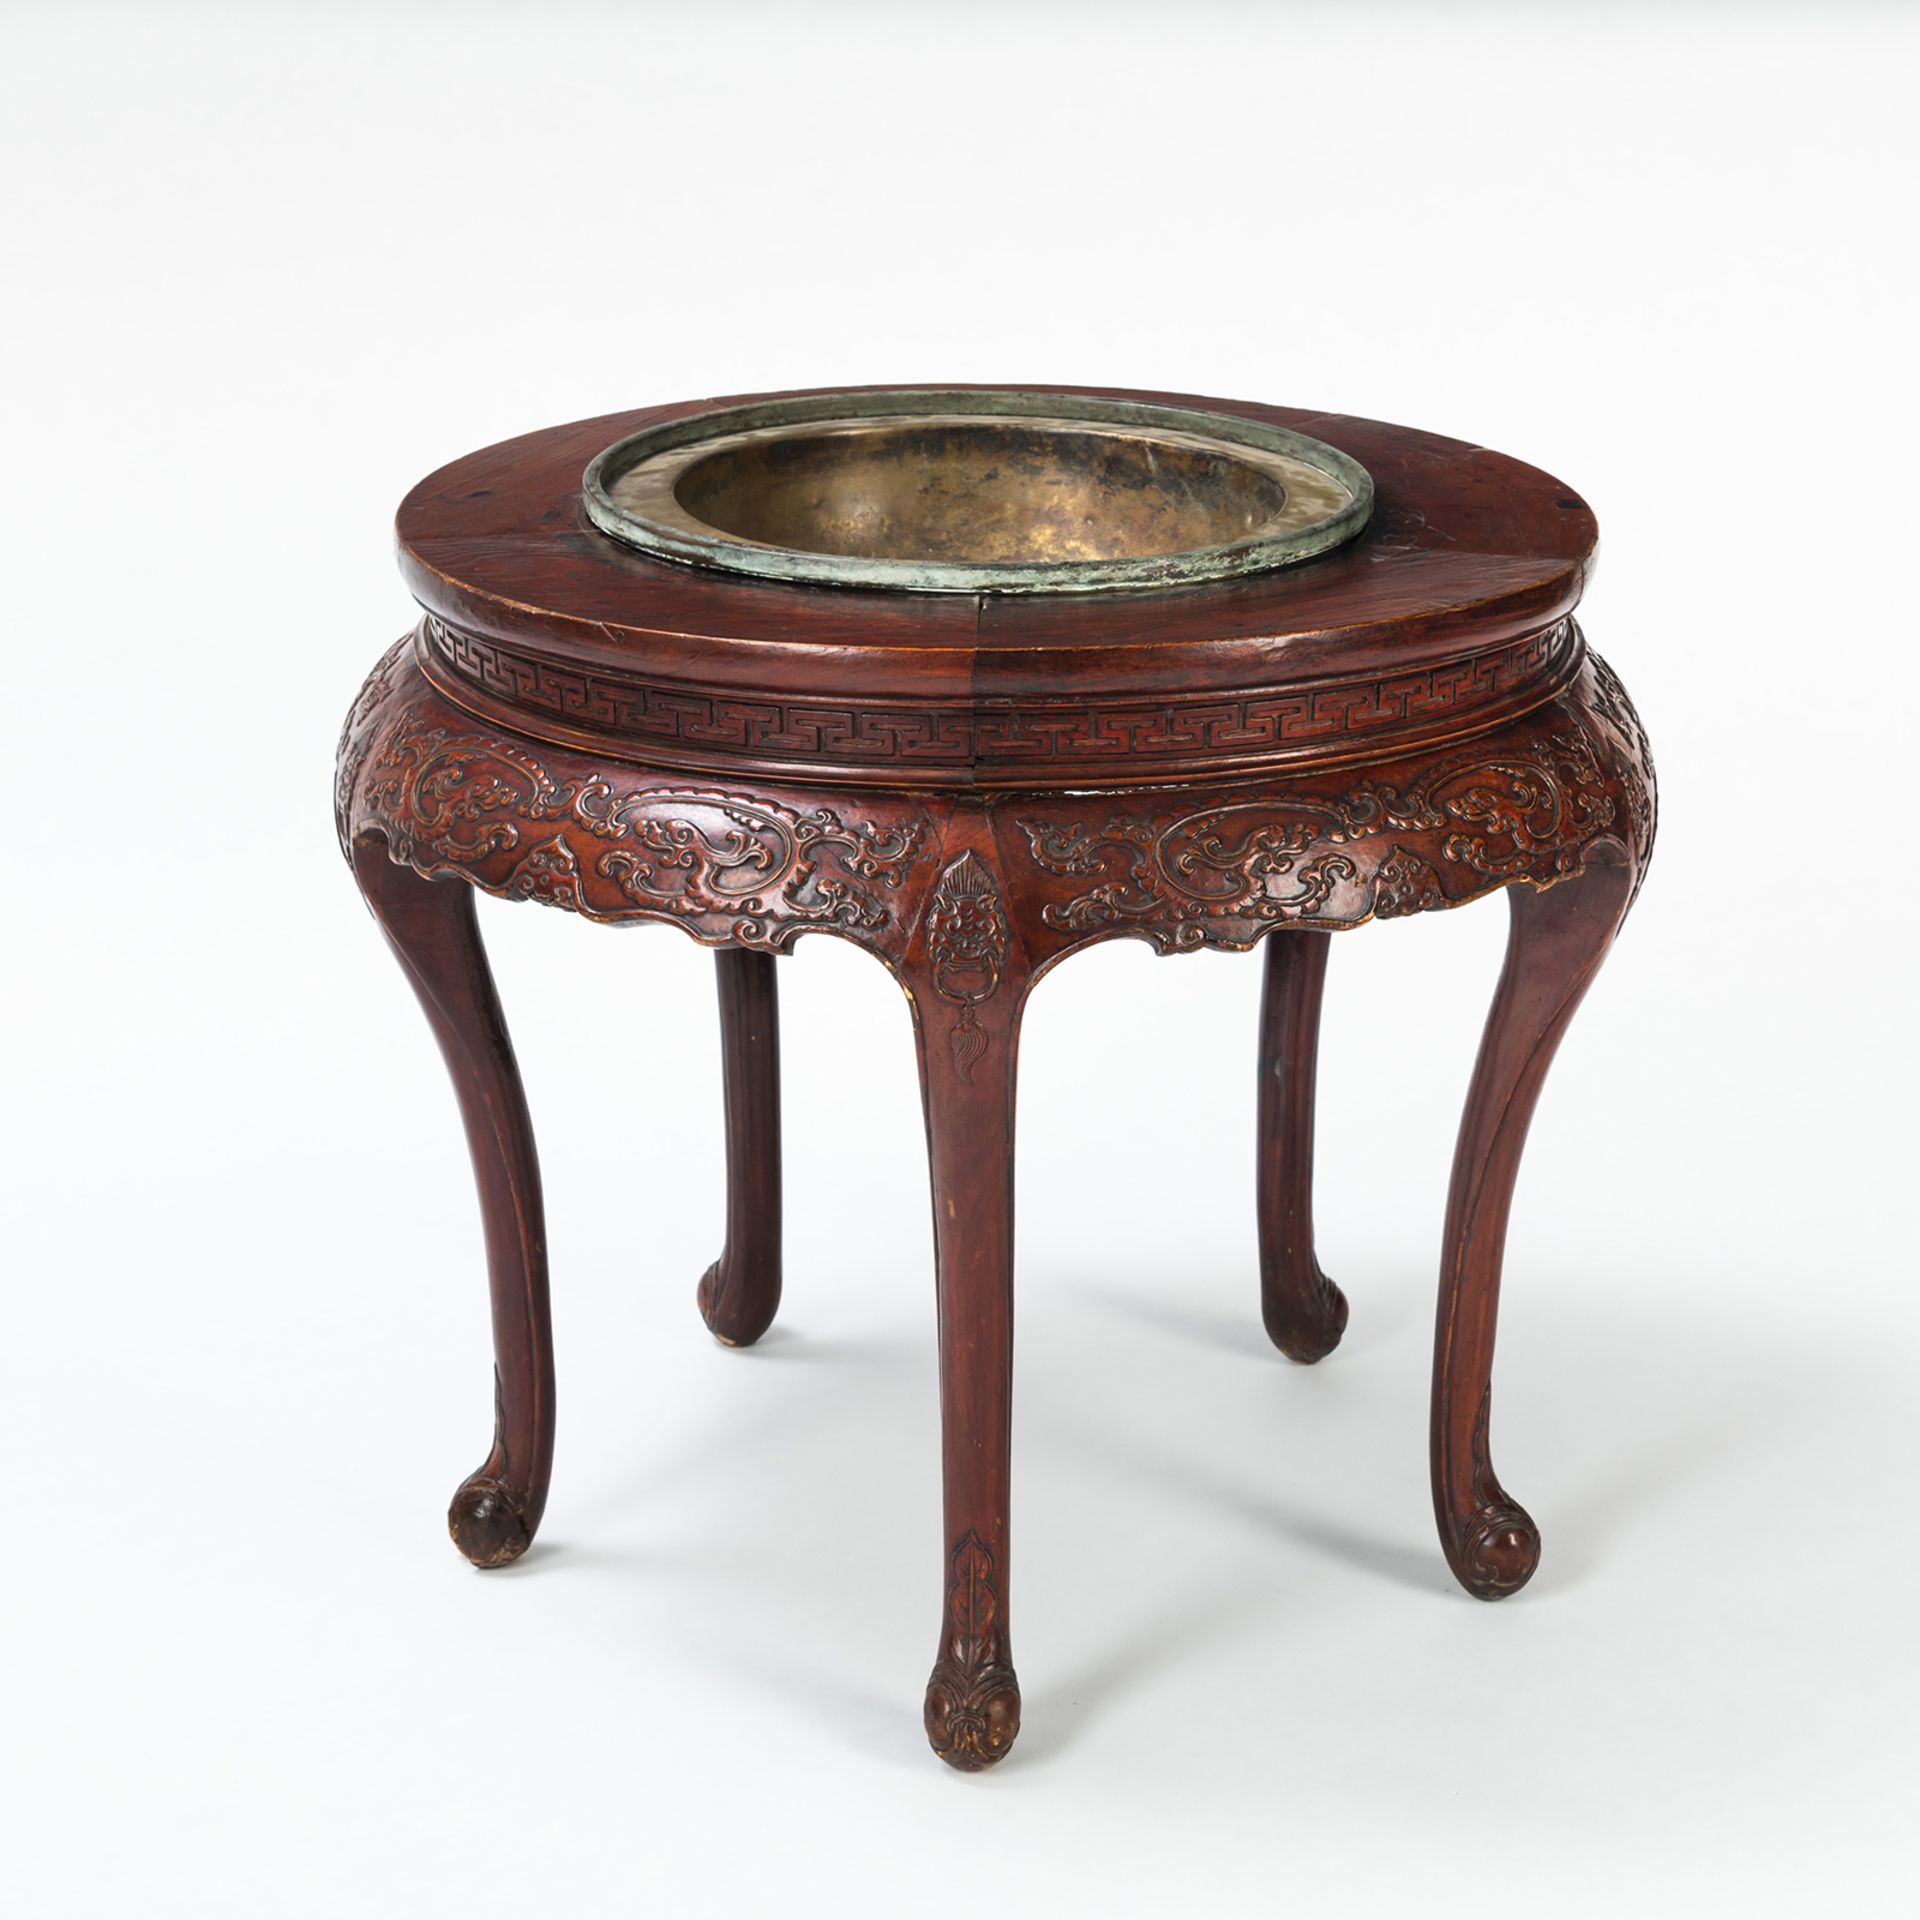 A CIRCULAR DRAGON RELIEF WOOD TABLE WITH METAL BASIN - Image 5 of 8